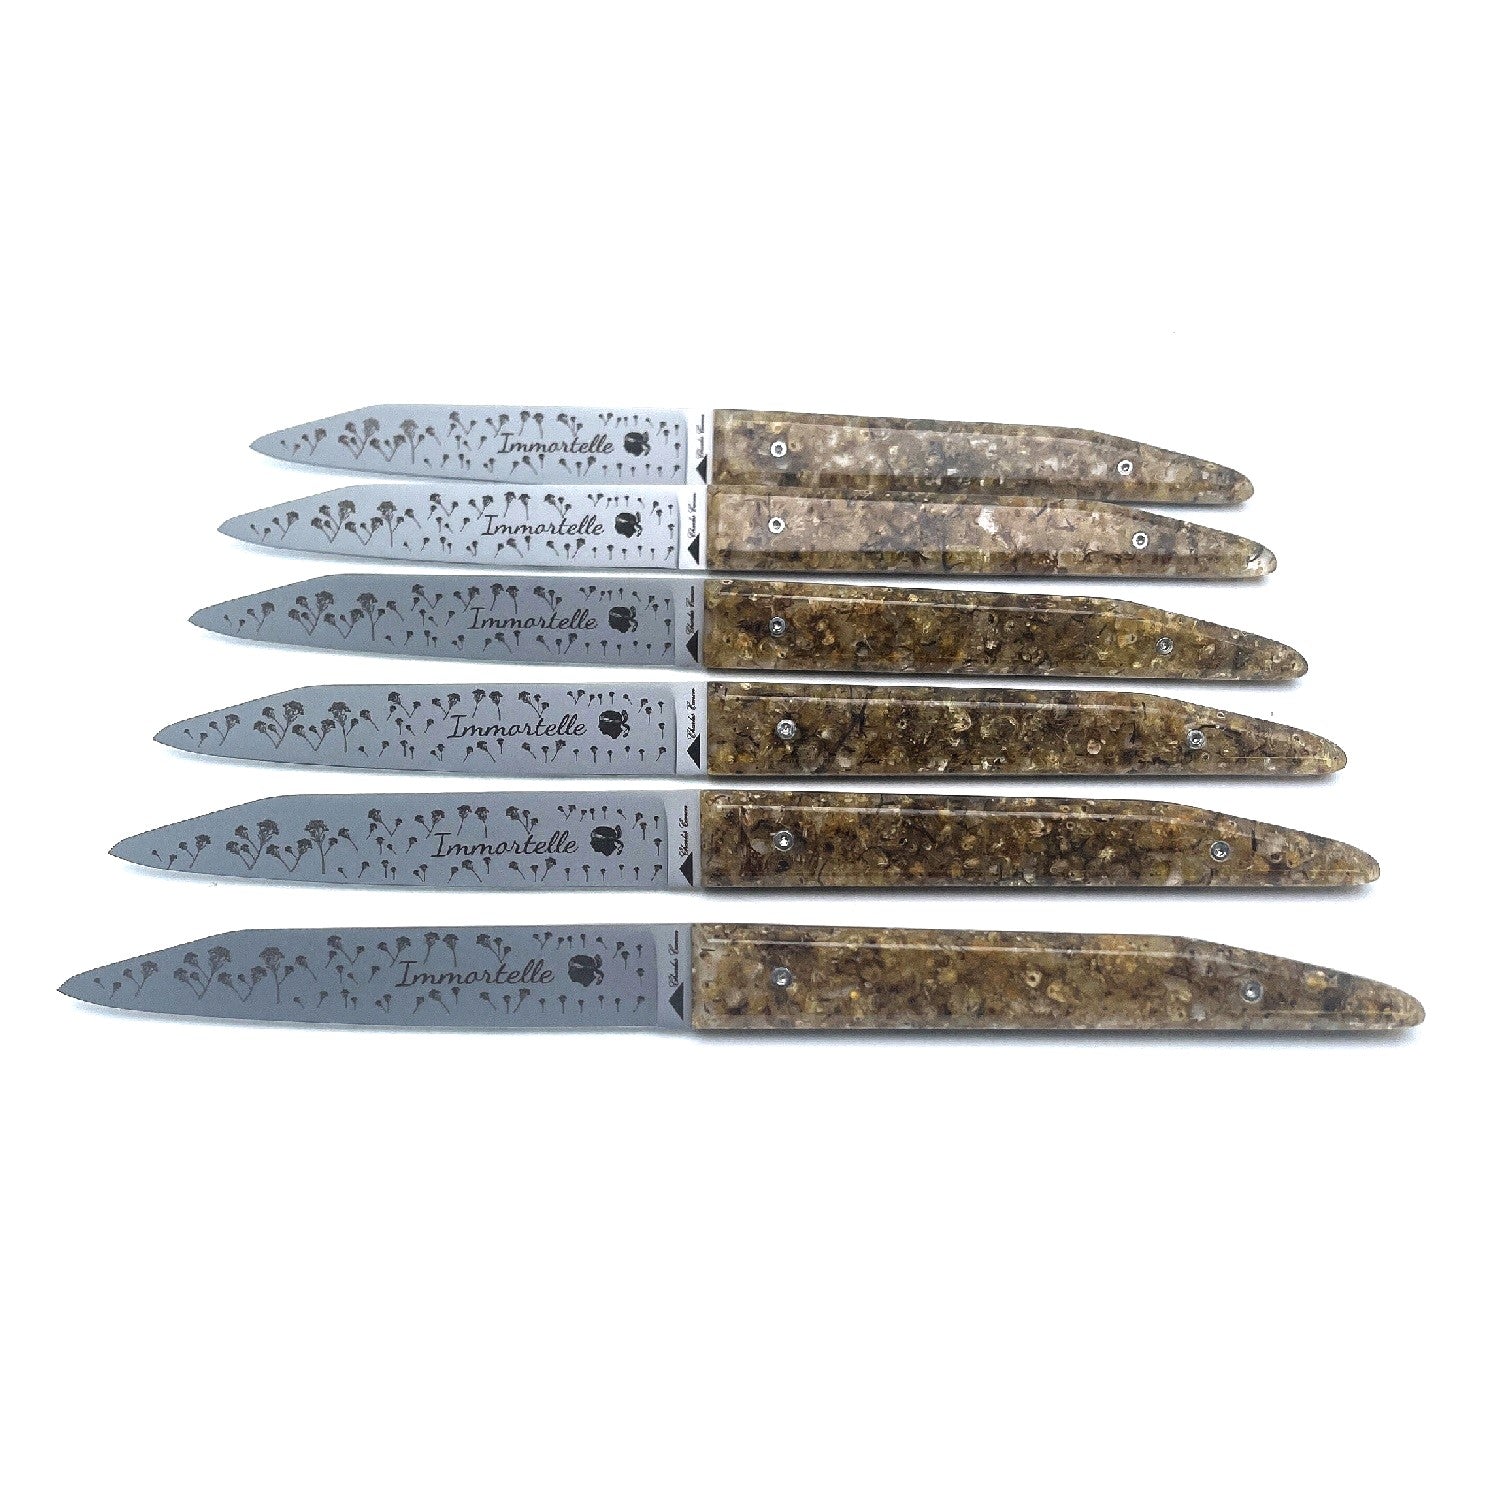 6 table knives with their handles made of Corsican immortelle flowers